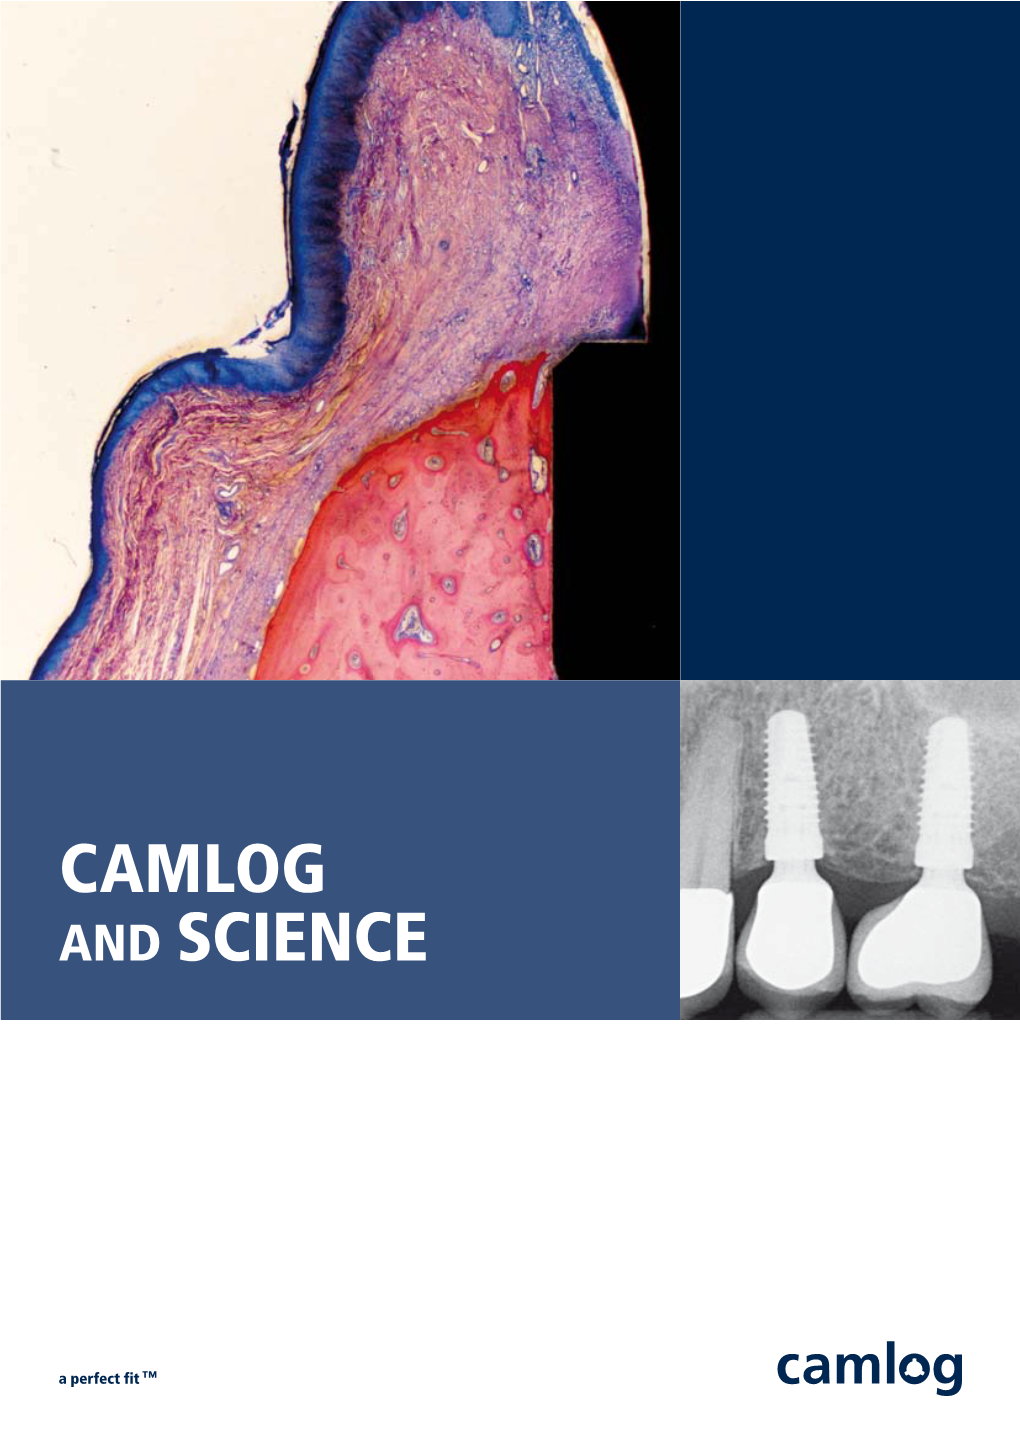 Camlog and Science